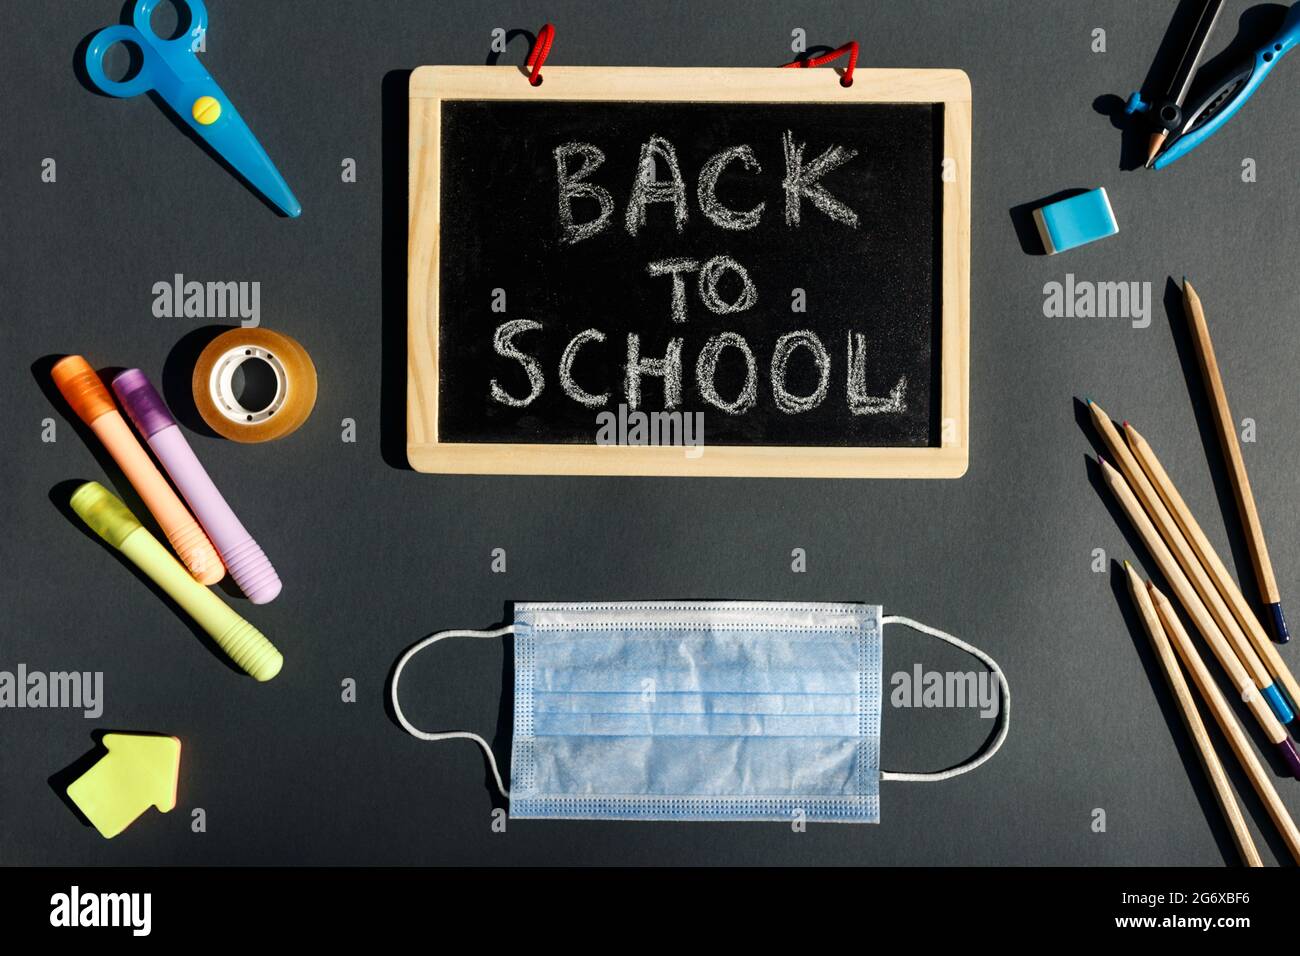 E- learning,Online education, School stationery supplies, medical mask, social distancing, school reopening. Back to school after covid-19 pandemic. New normal concept.Top view copy space,blackboard. Stock Photo